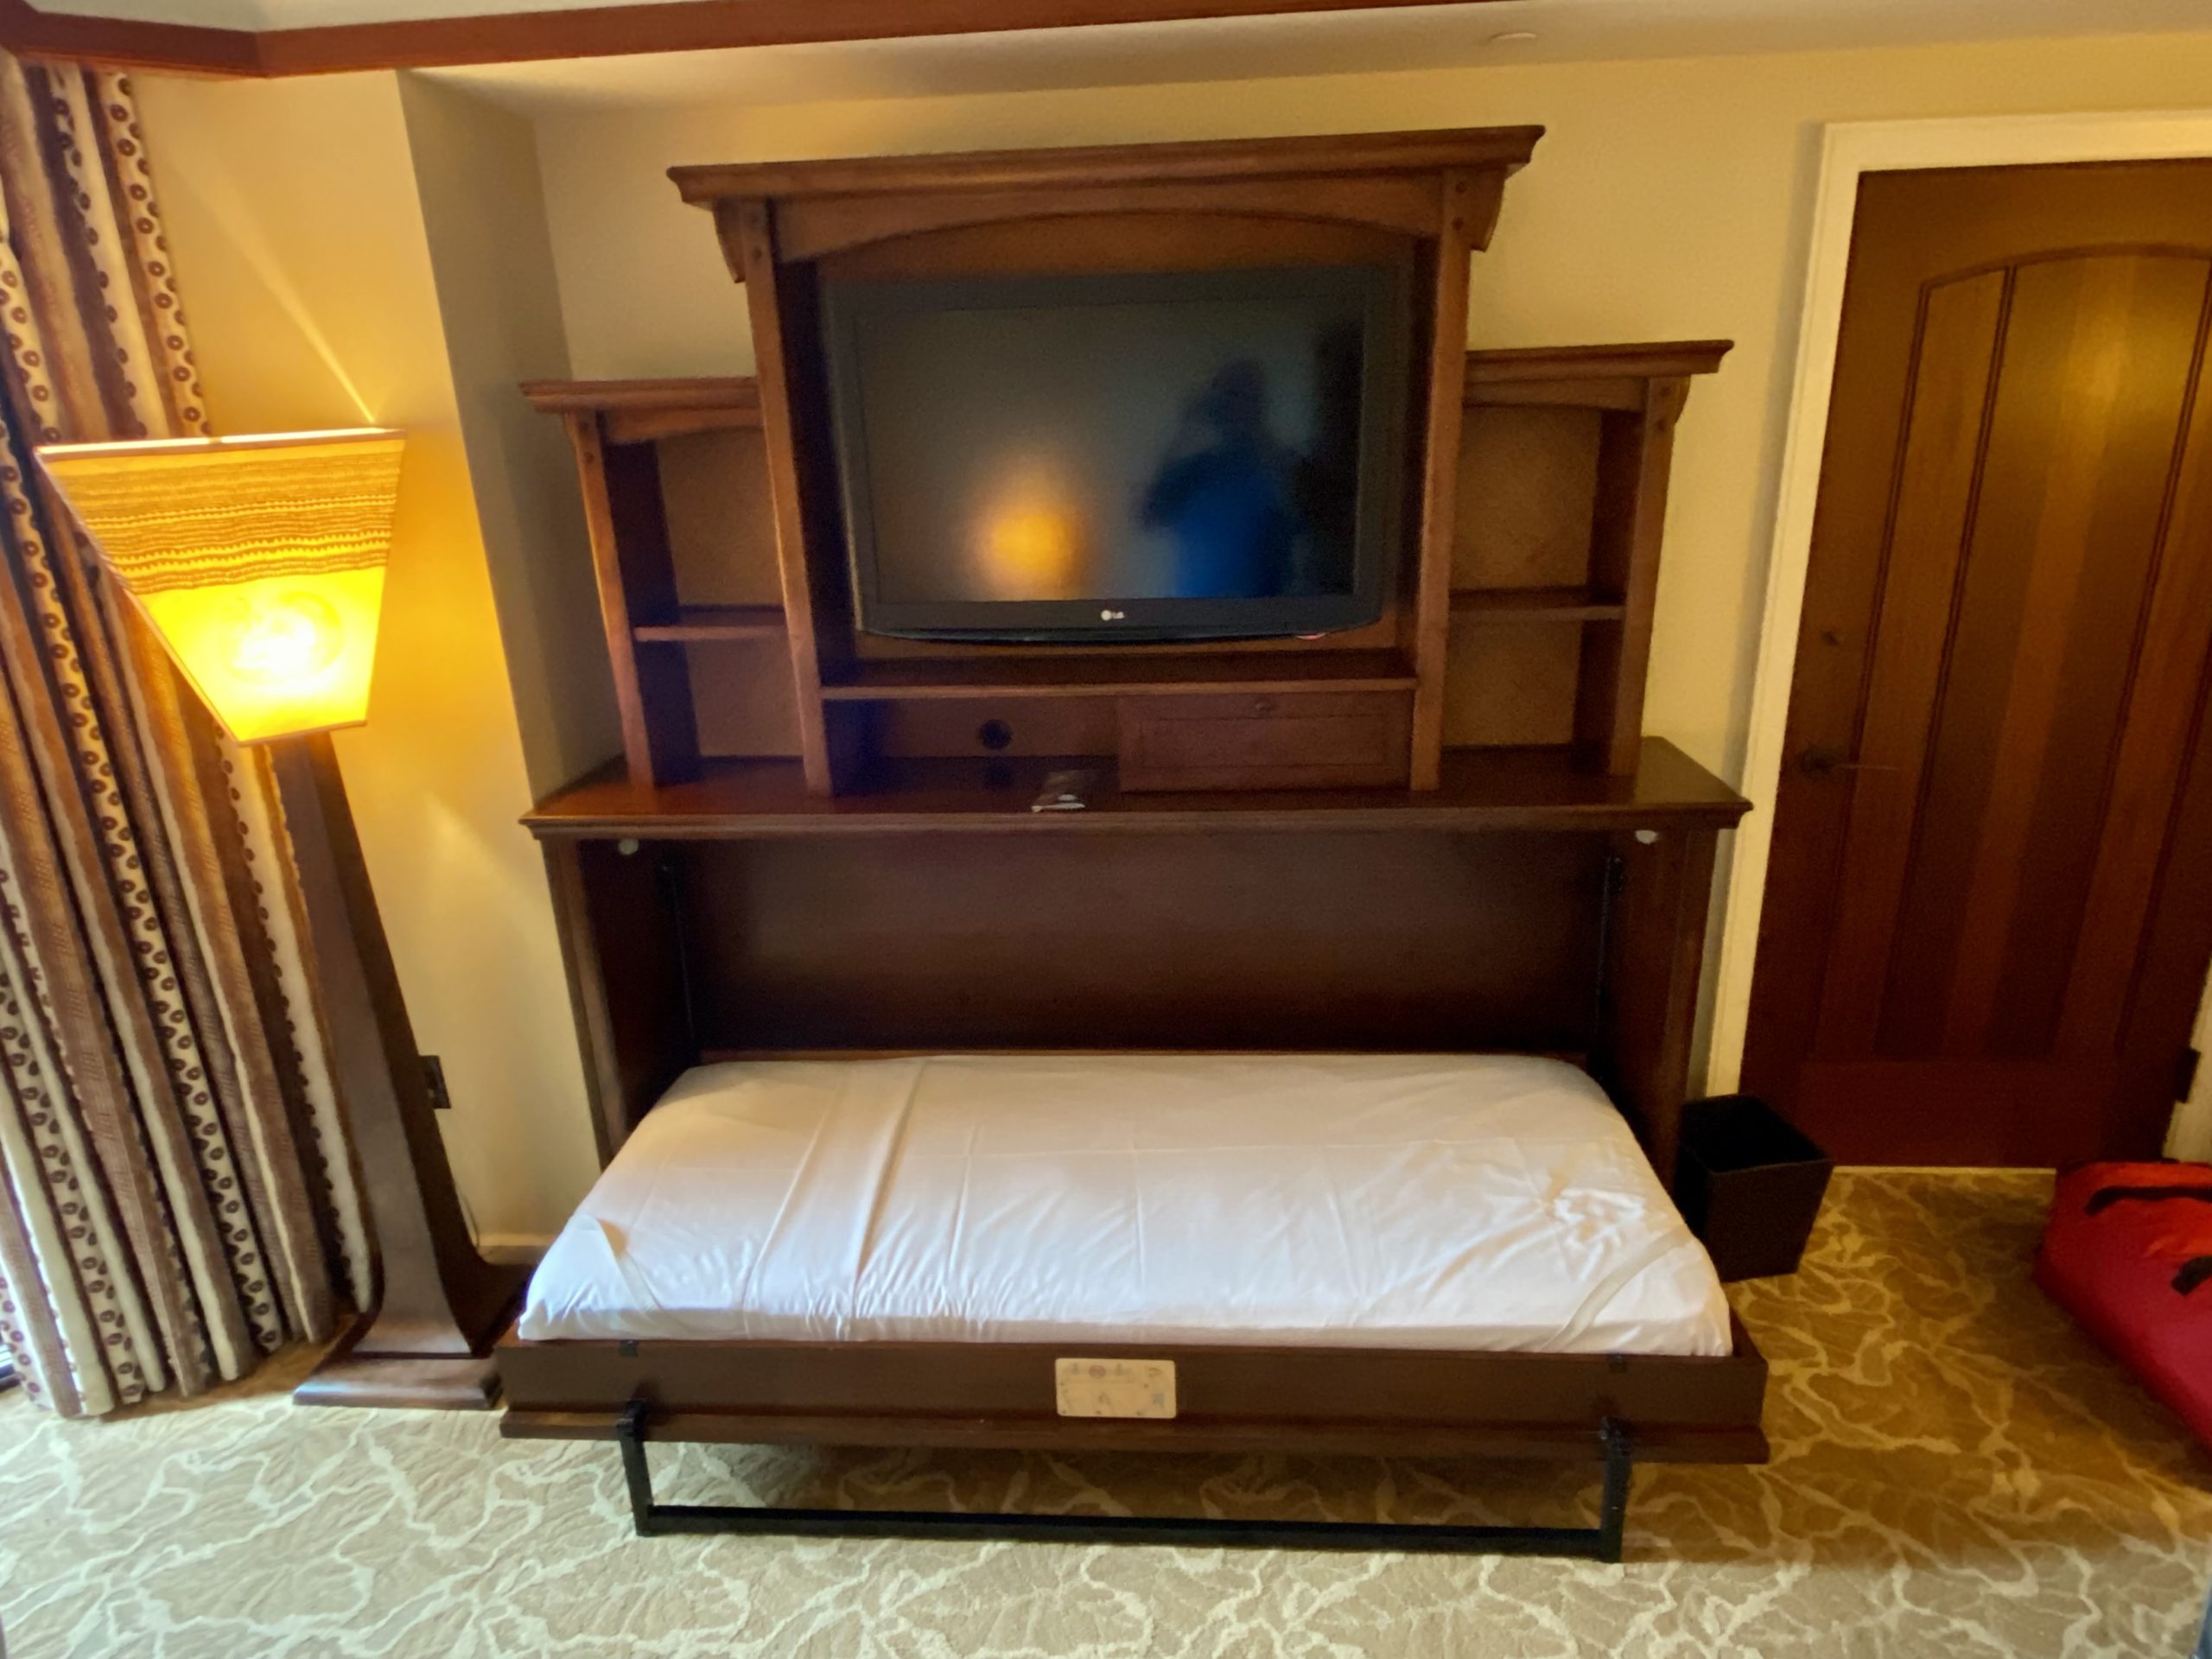 a bed with a tv on it